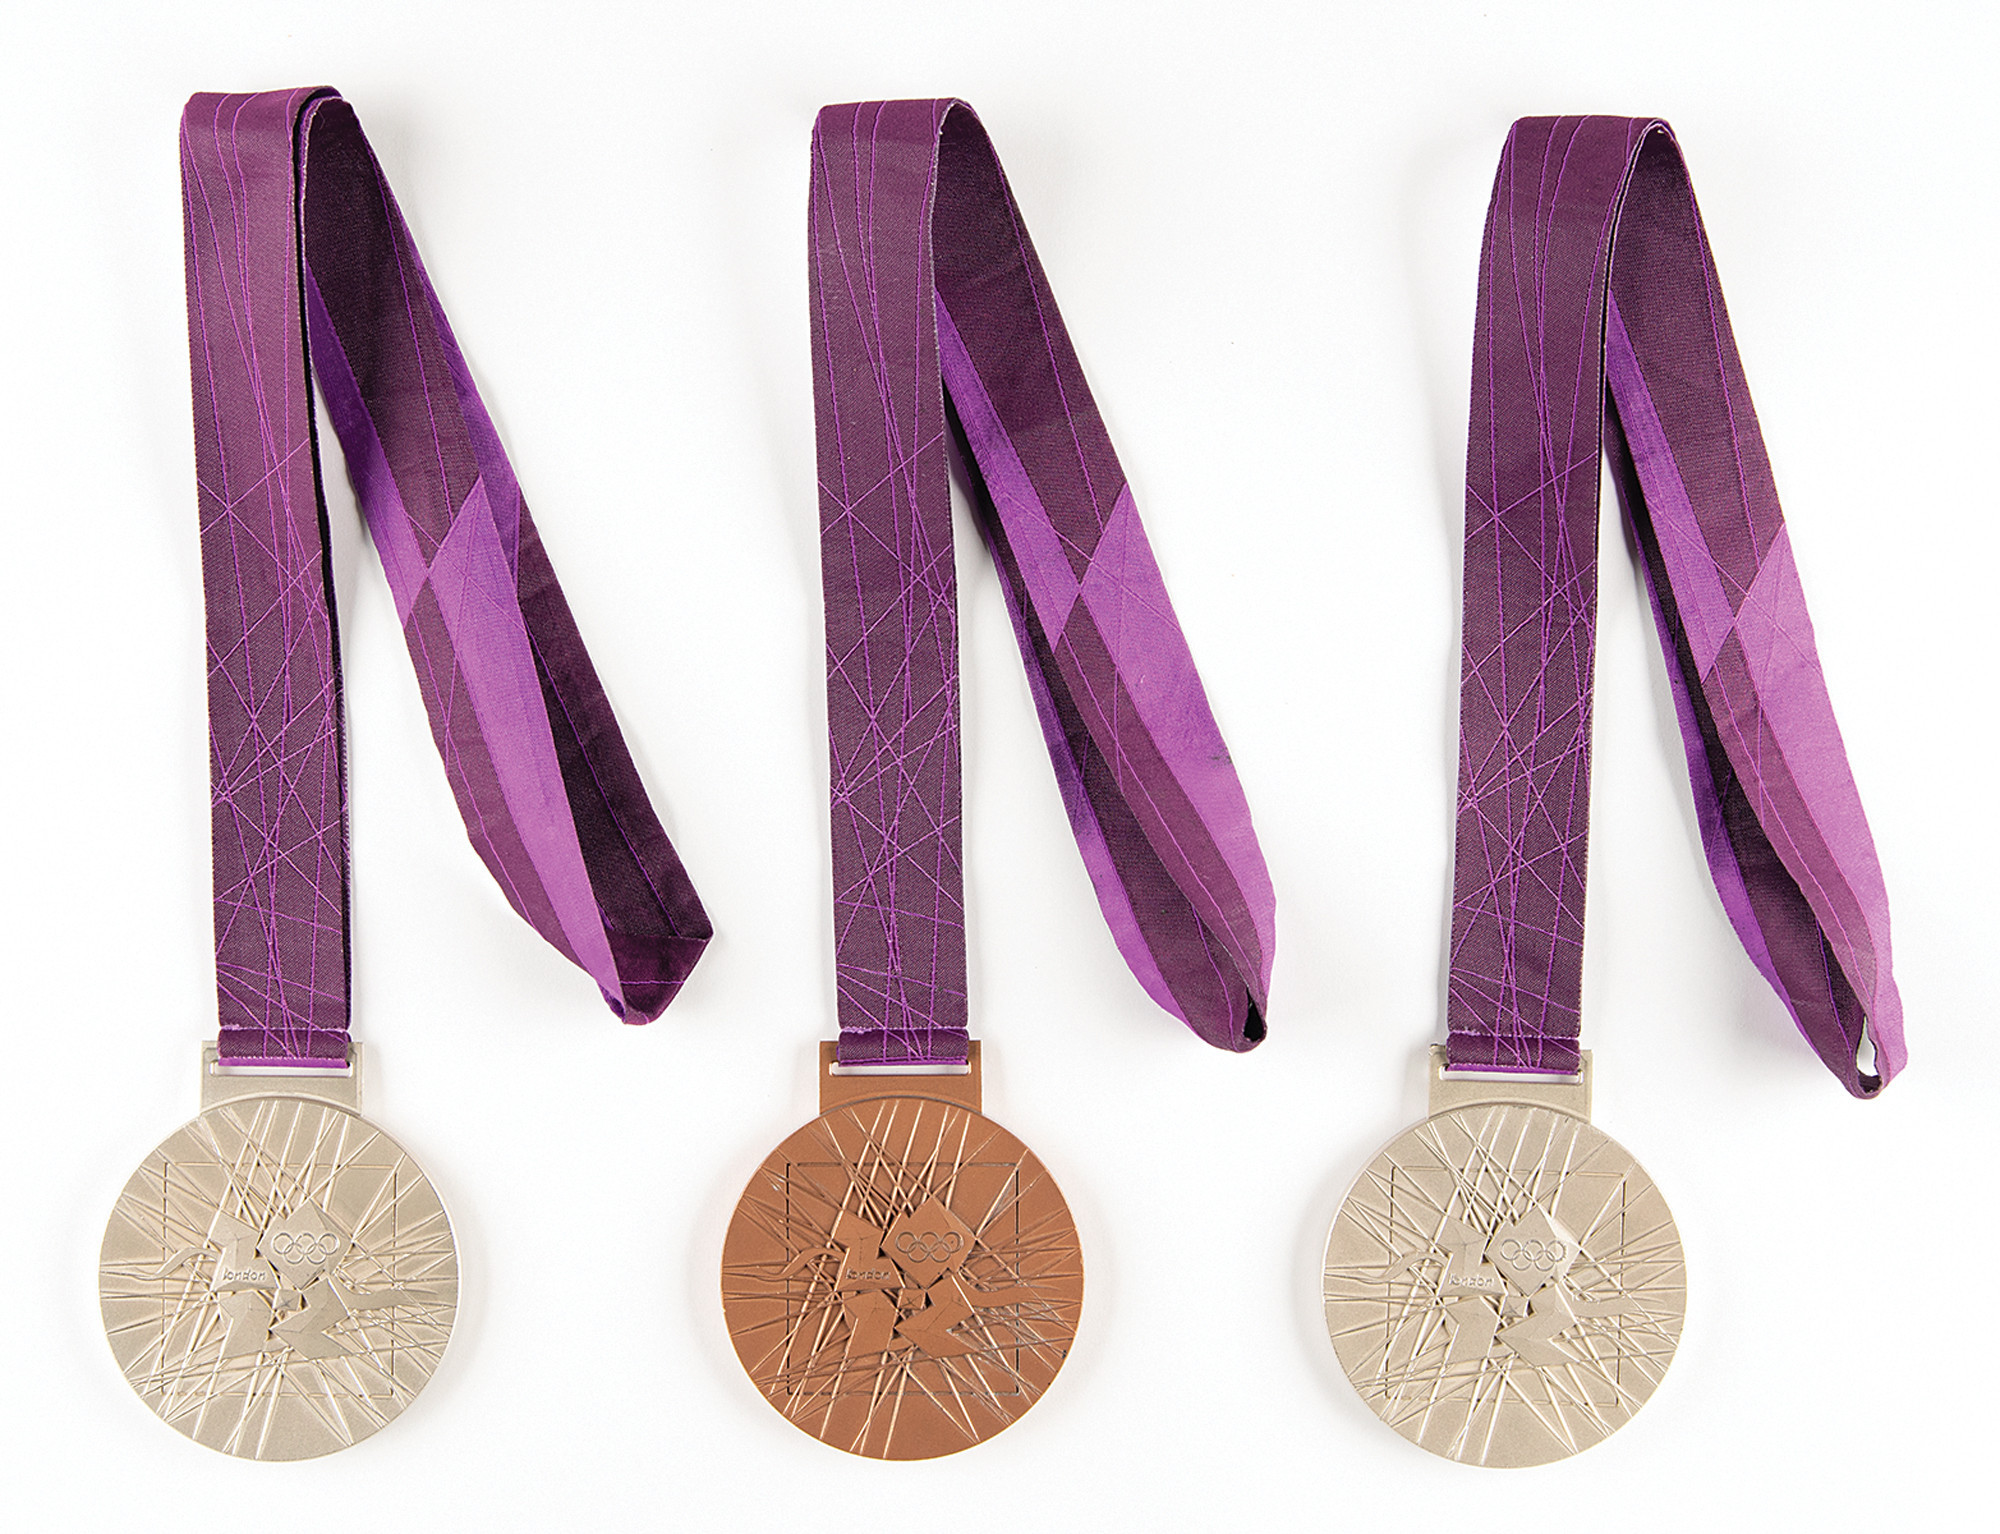 Ryan Lochte has auctioned off half of his 12 Olympic medals, including the two silver and bronze from London 2012 ©RR Auctions